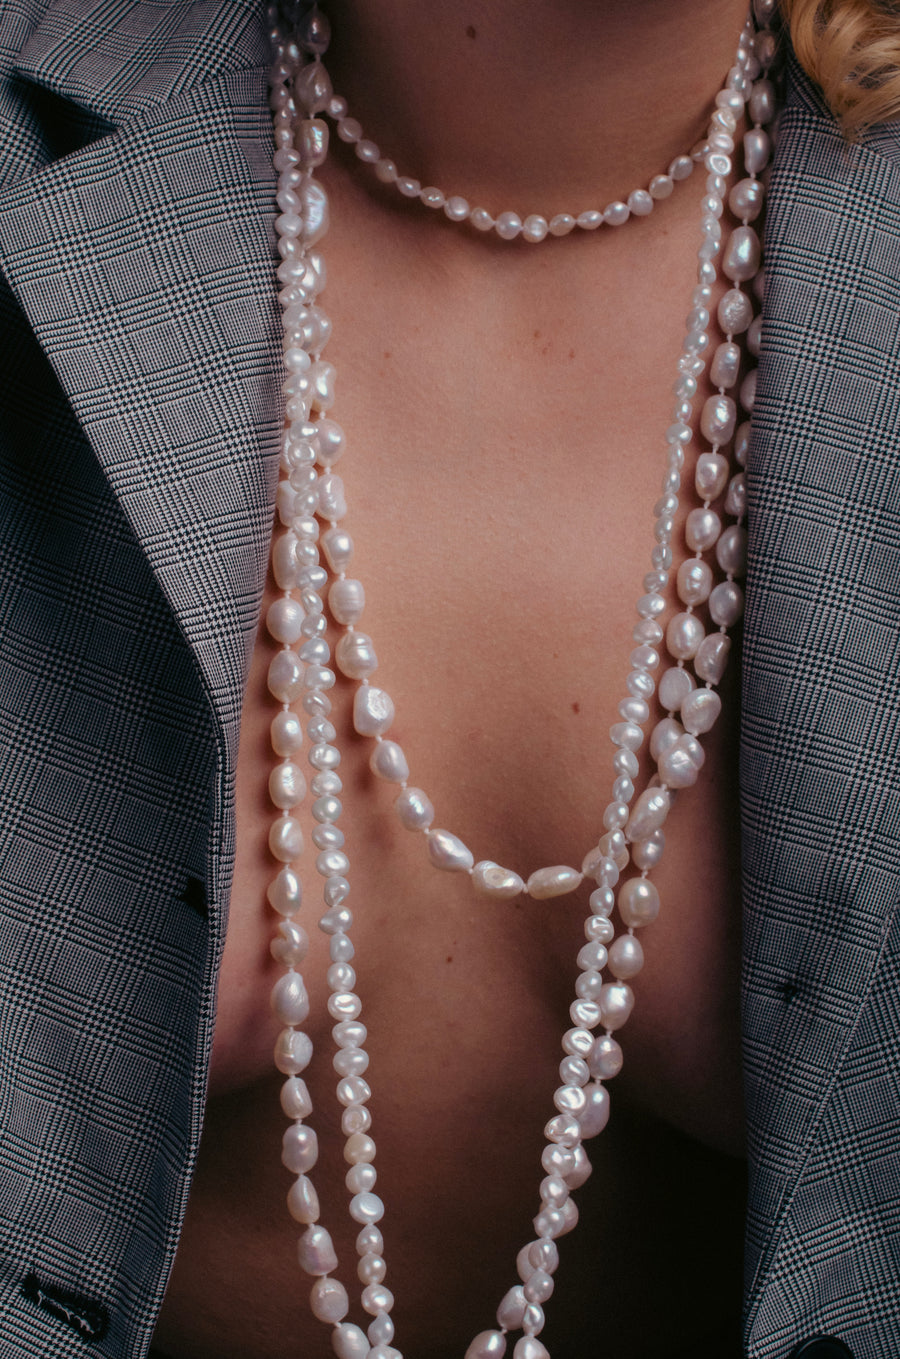 Body Chain Pearl Necklace  - white